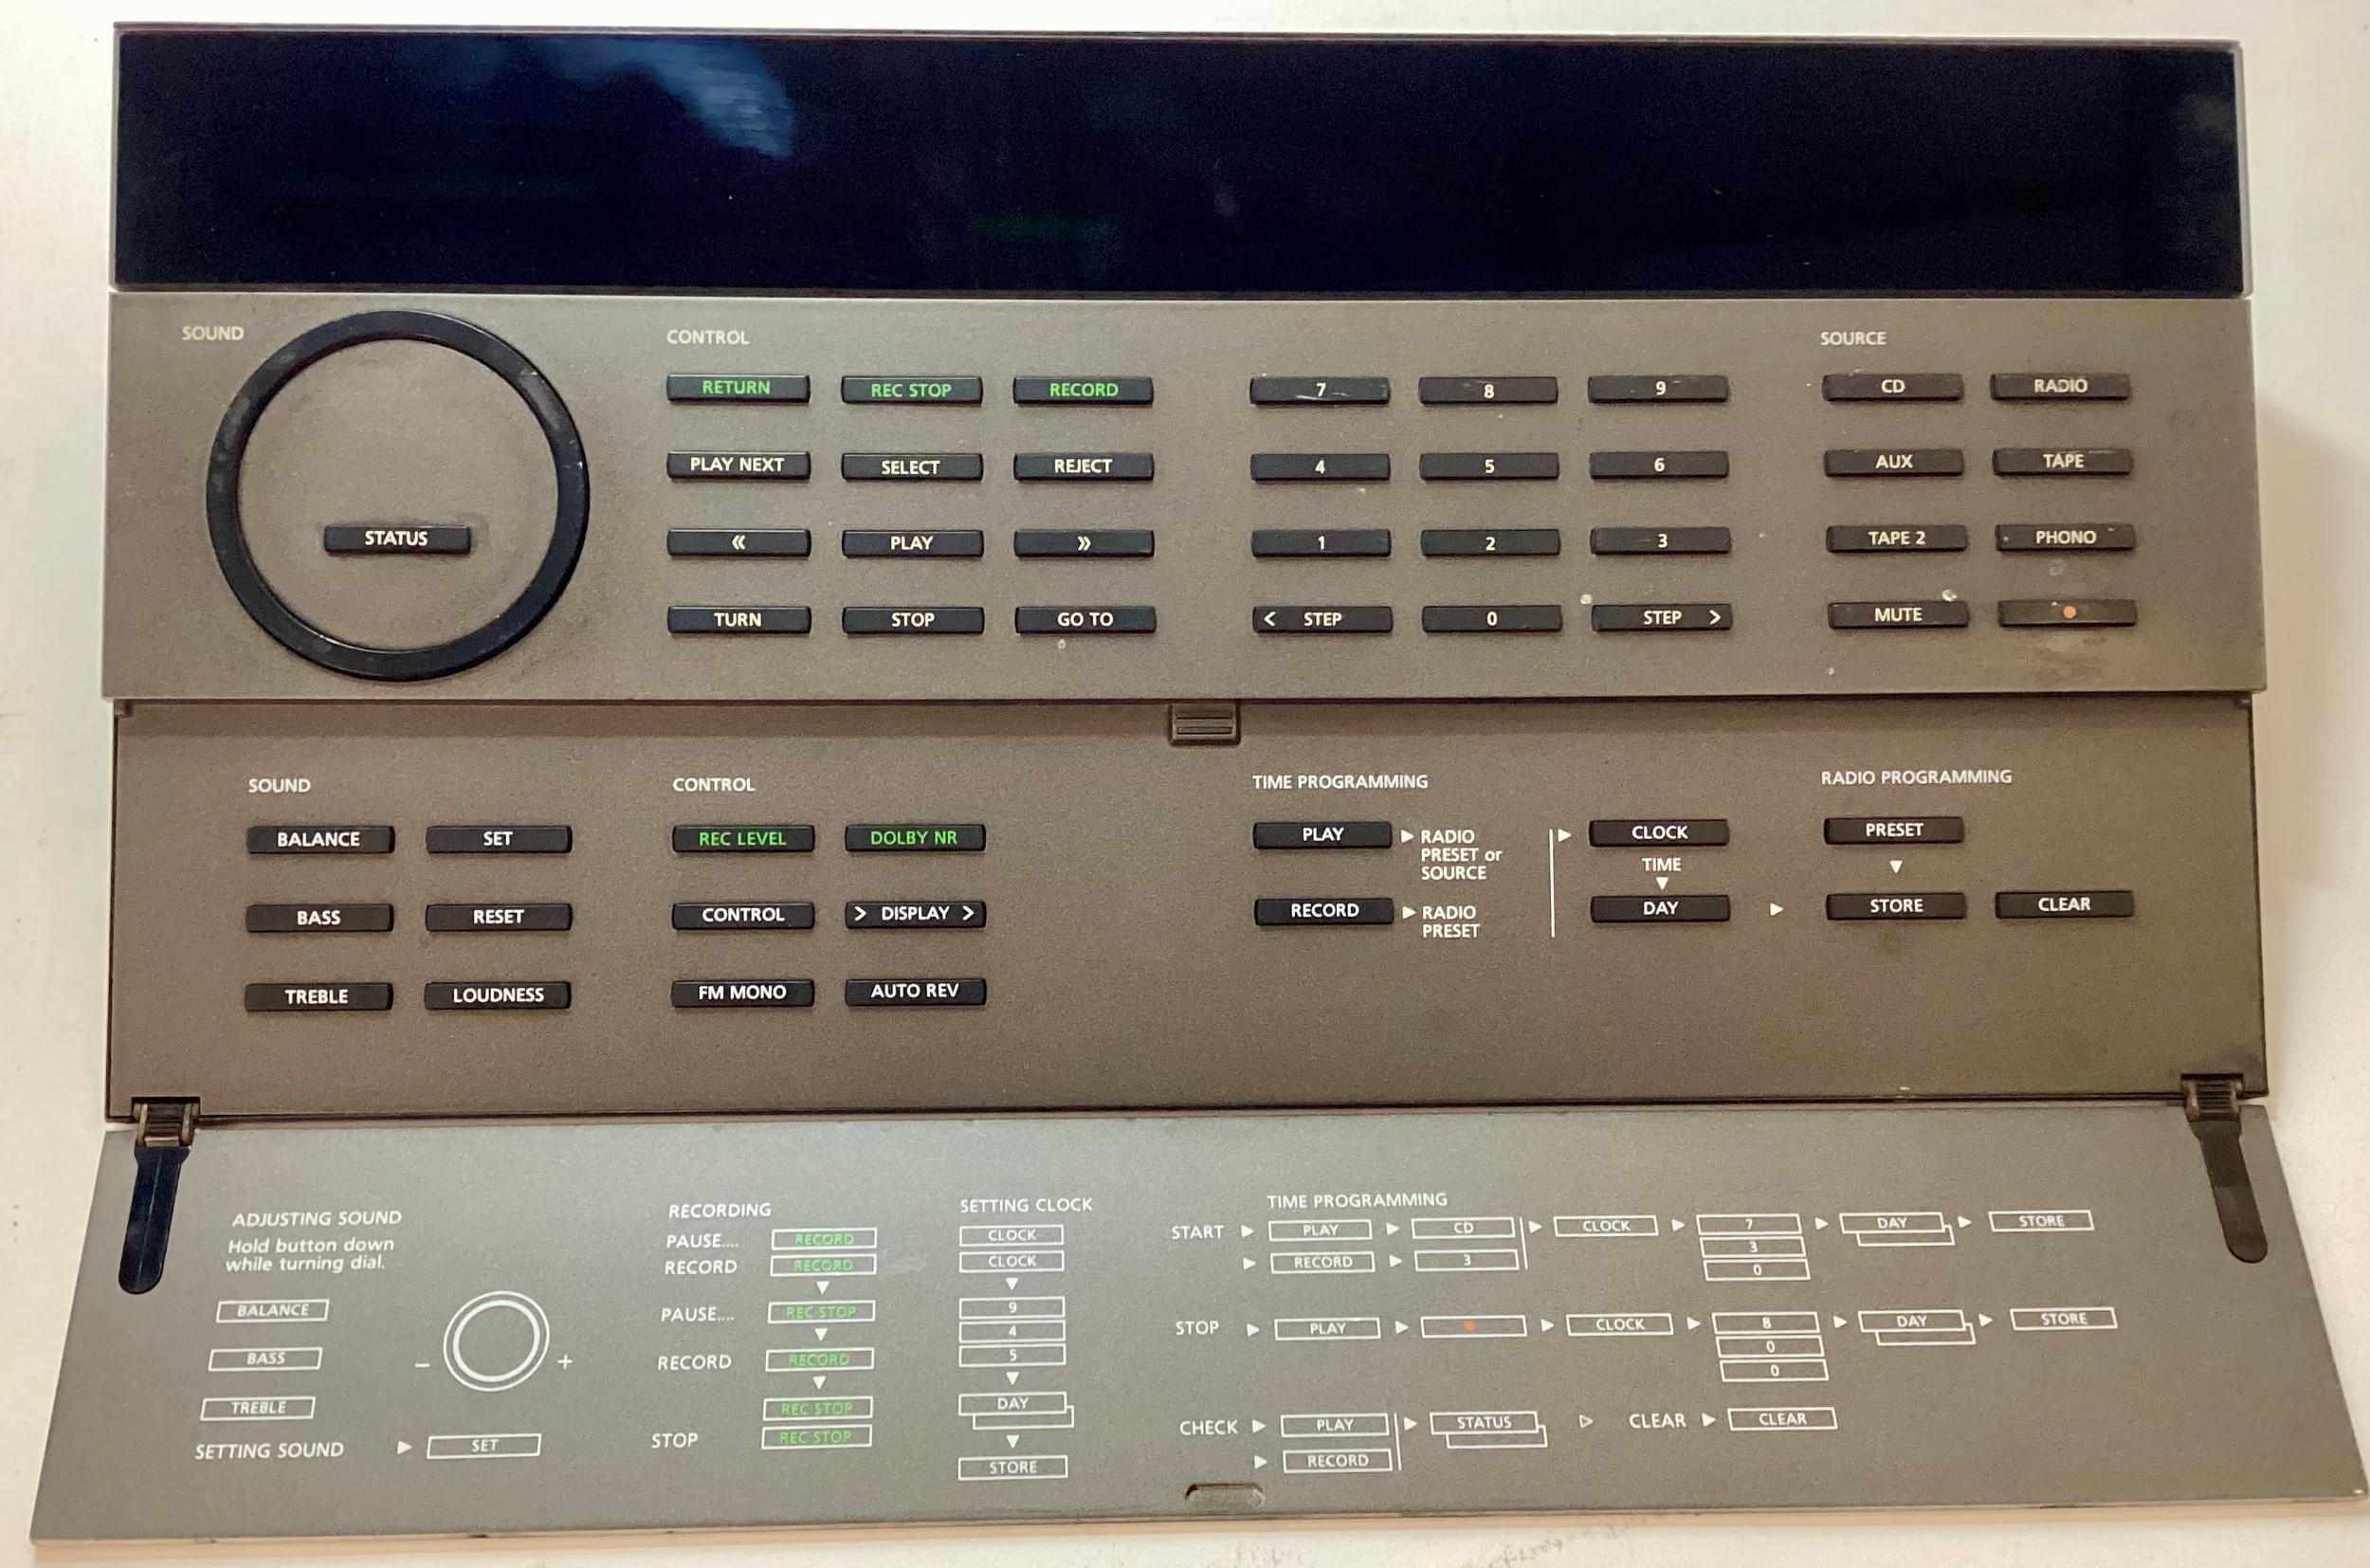 BANG & OLUFSEN MASTER CONTROL PANEL. This is a remote control for B&O equipment. The model number is - Bild 2 aus 4